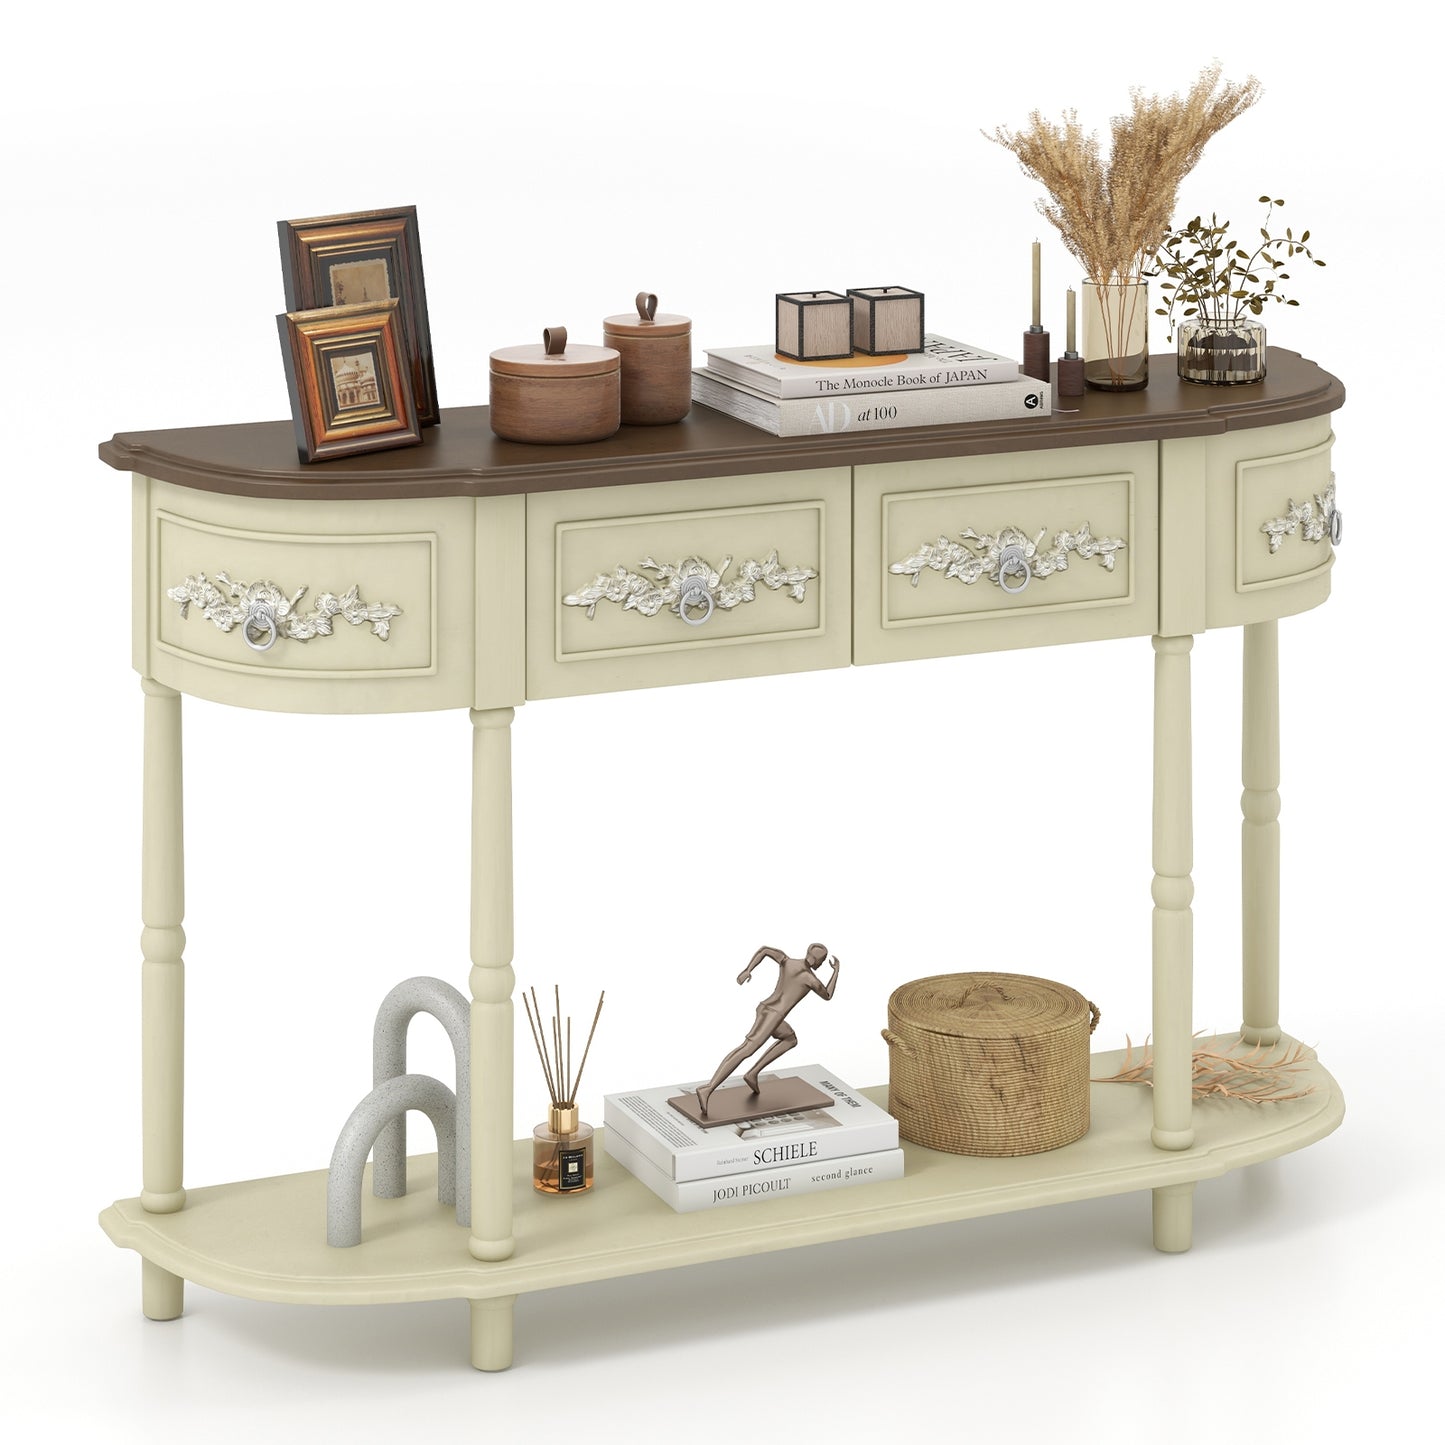 Retro Curved Console Table with Drawers and Solid Wood Legs-Beige